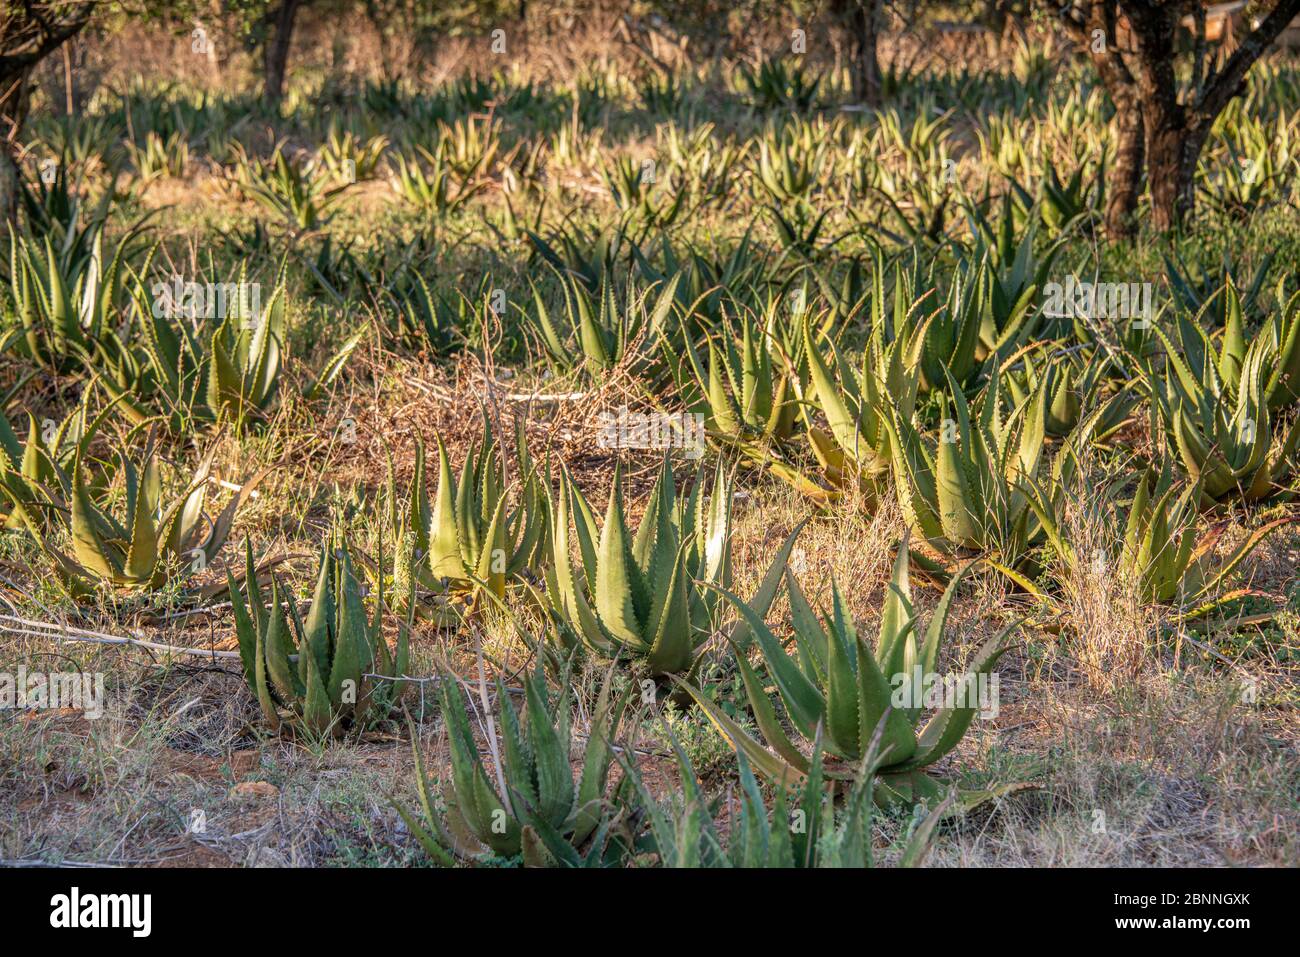 Field of aloe vera plants to be harvested for medicinal purposes Stock Photo